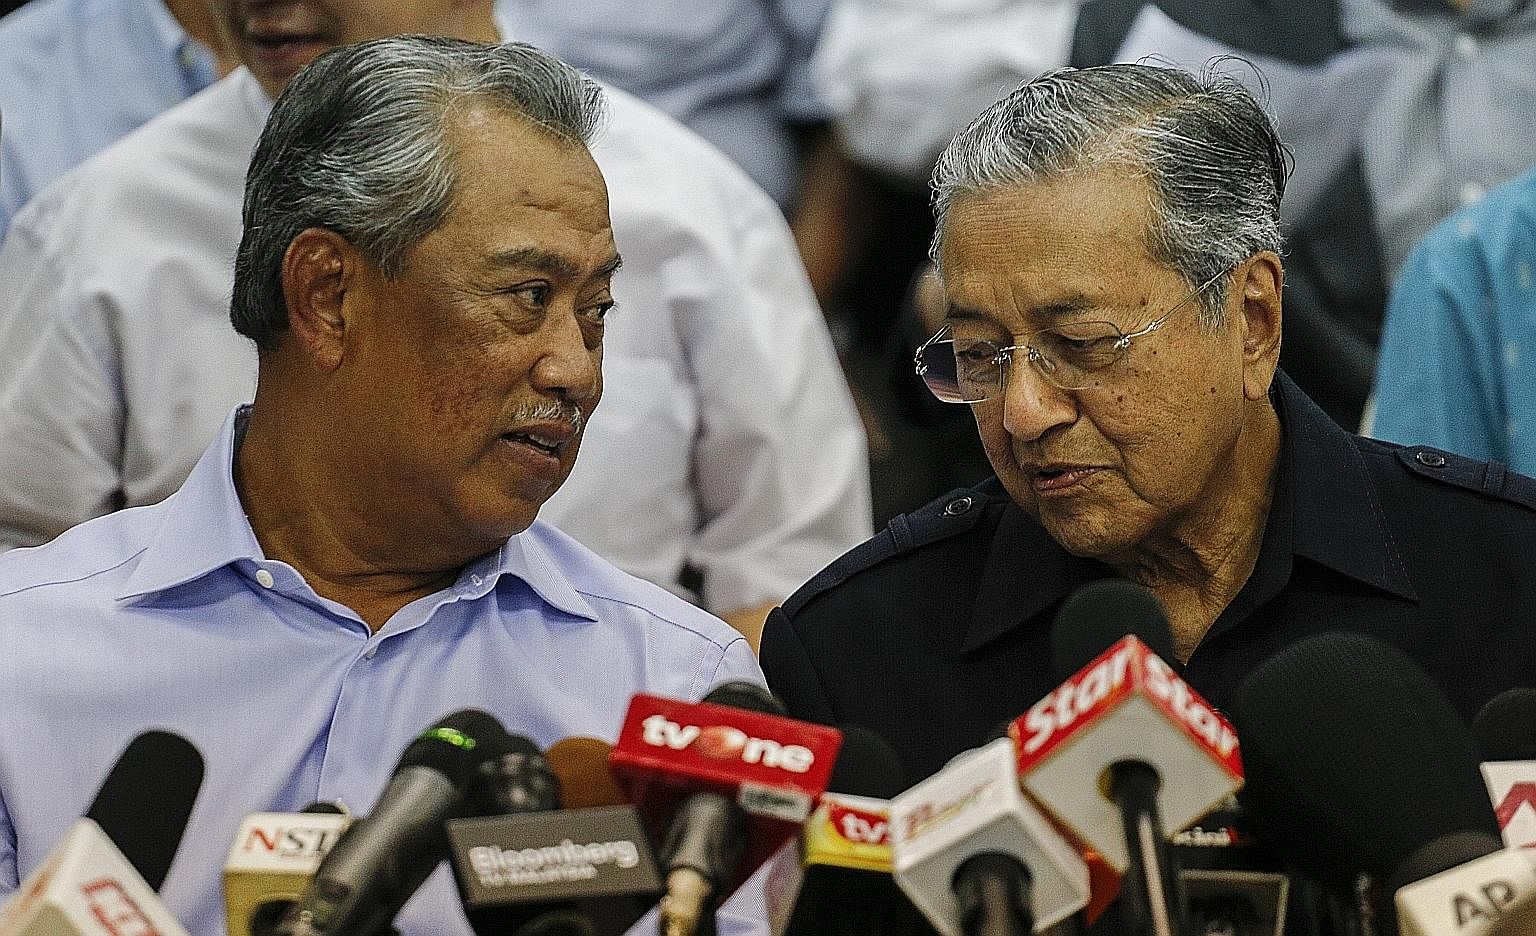 Dr Mahathir (right) with Tan Sri Muhyiddin at a media event in March. Dr Mahathir's move to force a change of leadership from outside Umno shows he no longer has clout within the ruling party. But it is not known what position Mr Muhyiddin, Umno's fo